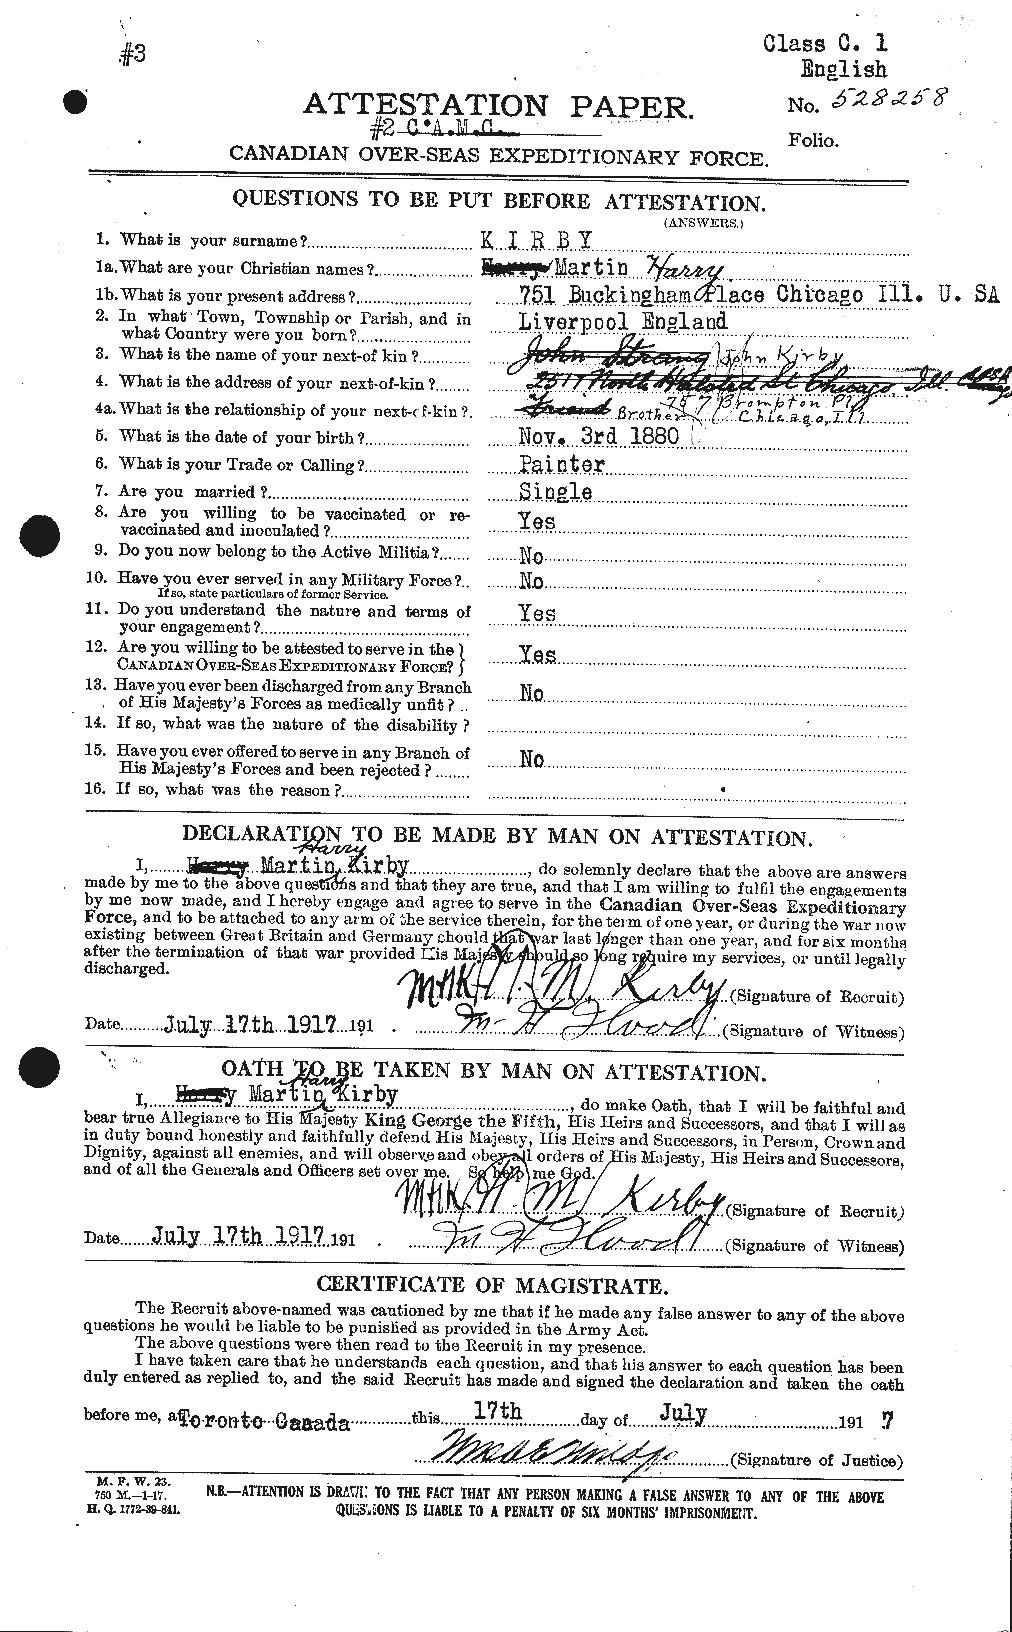 Personnel Records of the First World War - CEF 437254a